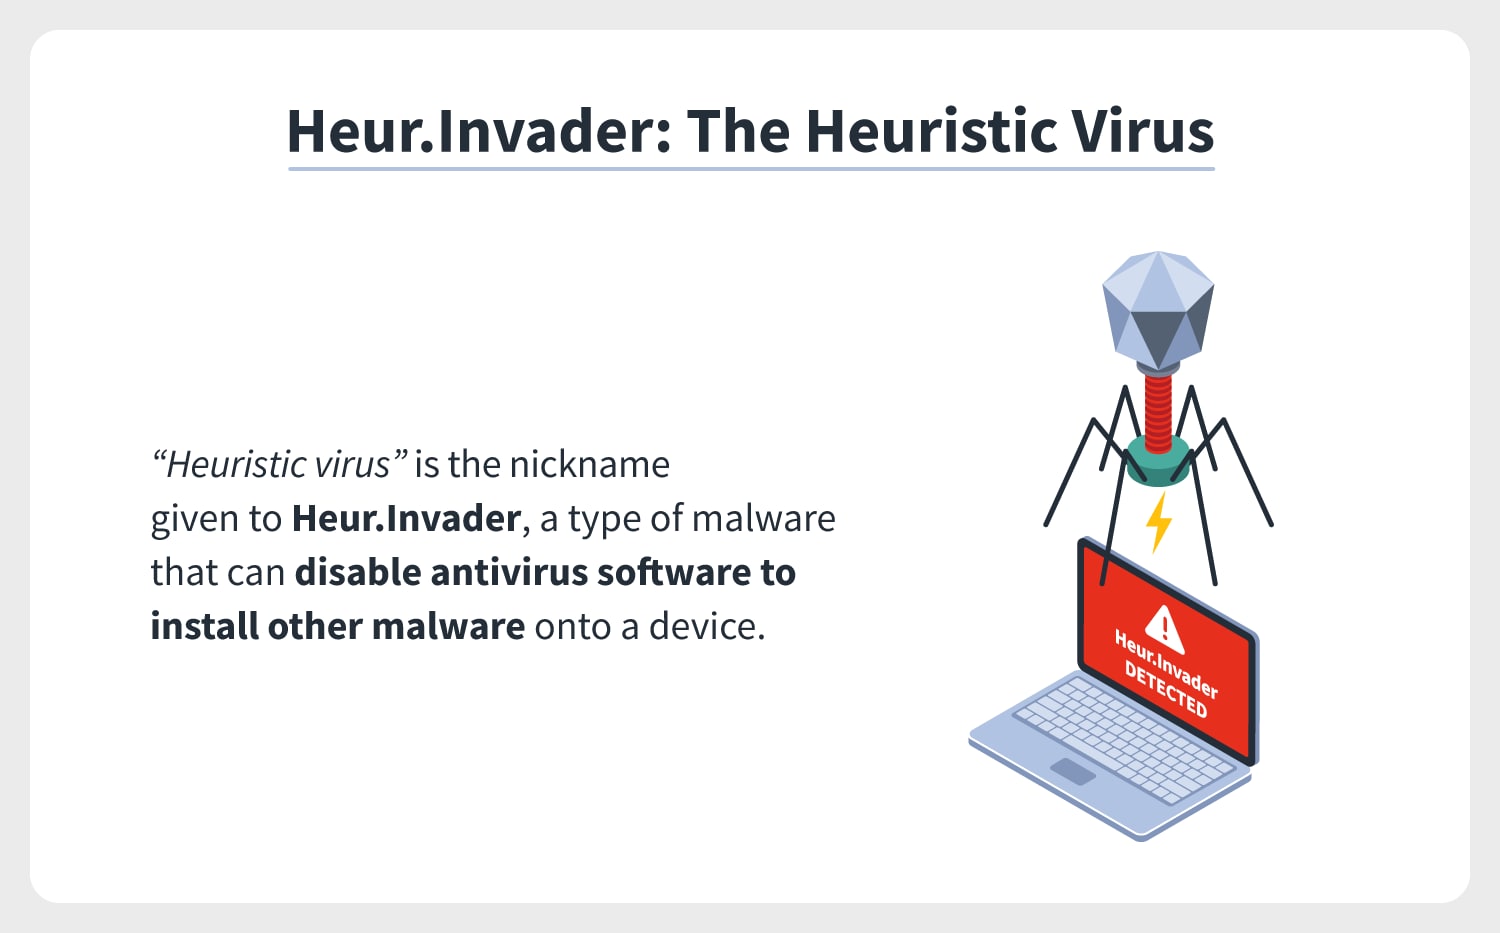 Scan your computer for any malware infections using a reputable antivirus or anti-malware software.
If any malware is detected, follow the software's instructions to remove it completely from your system.